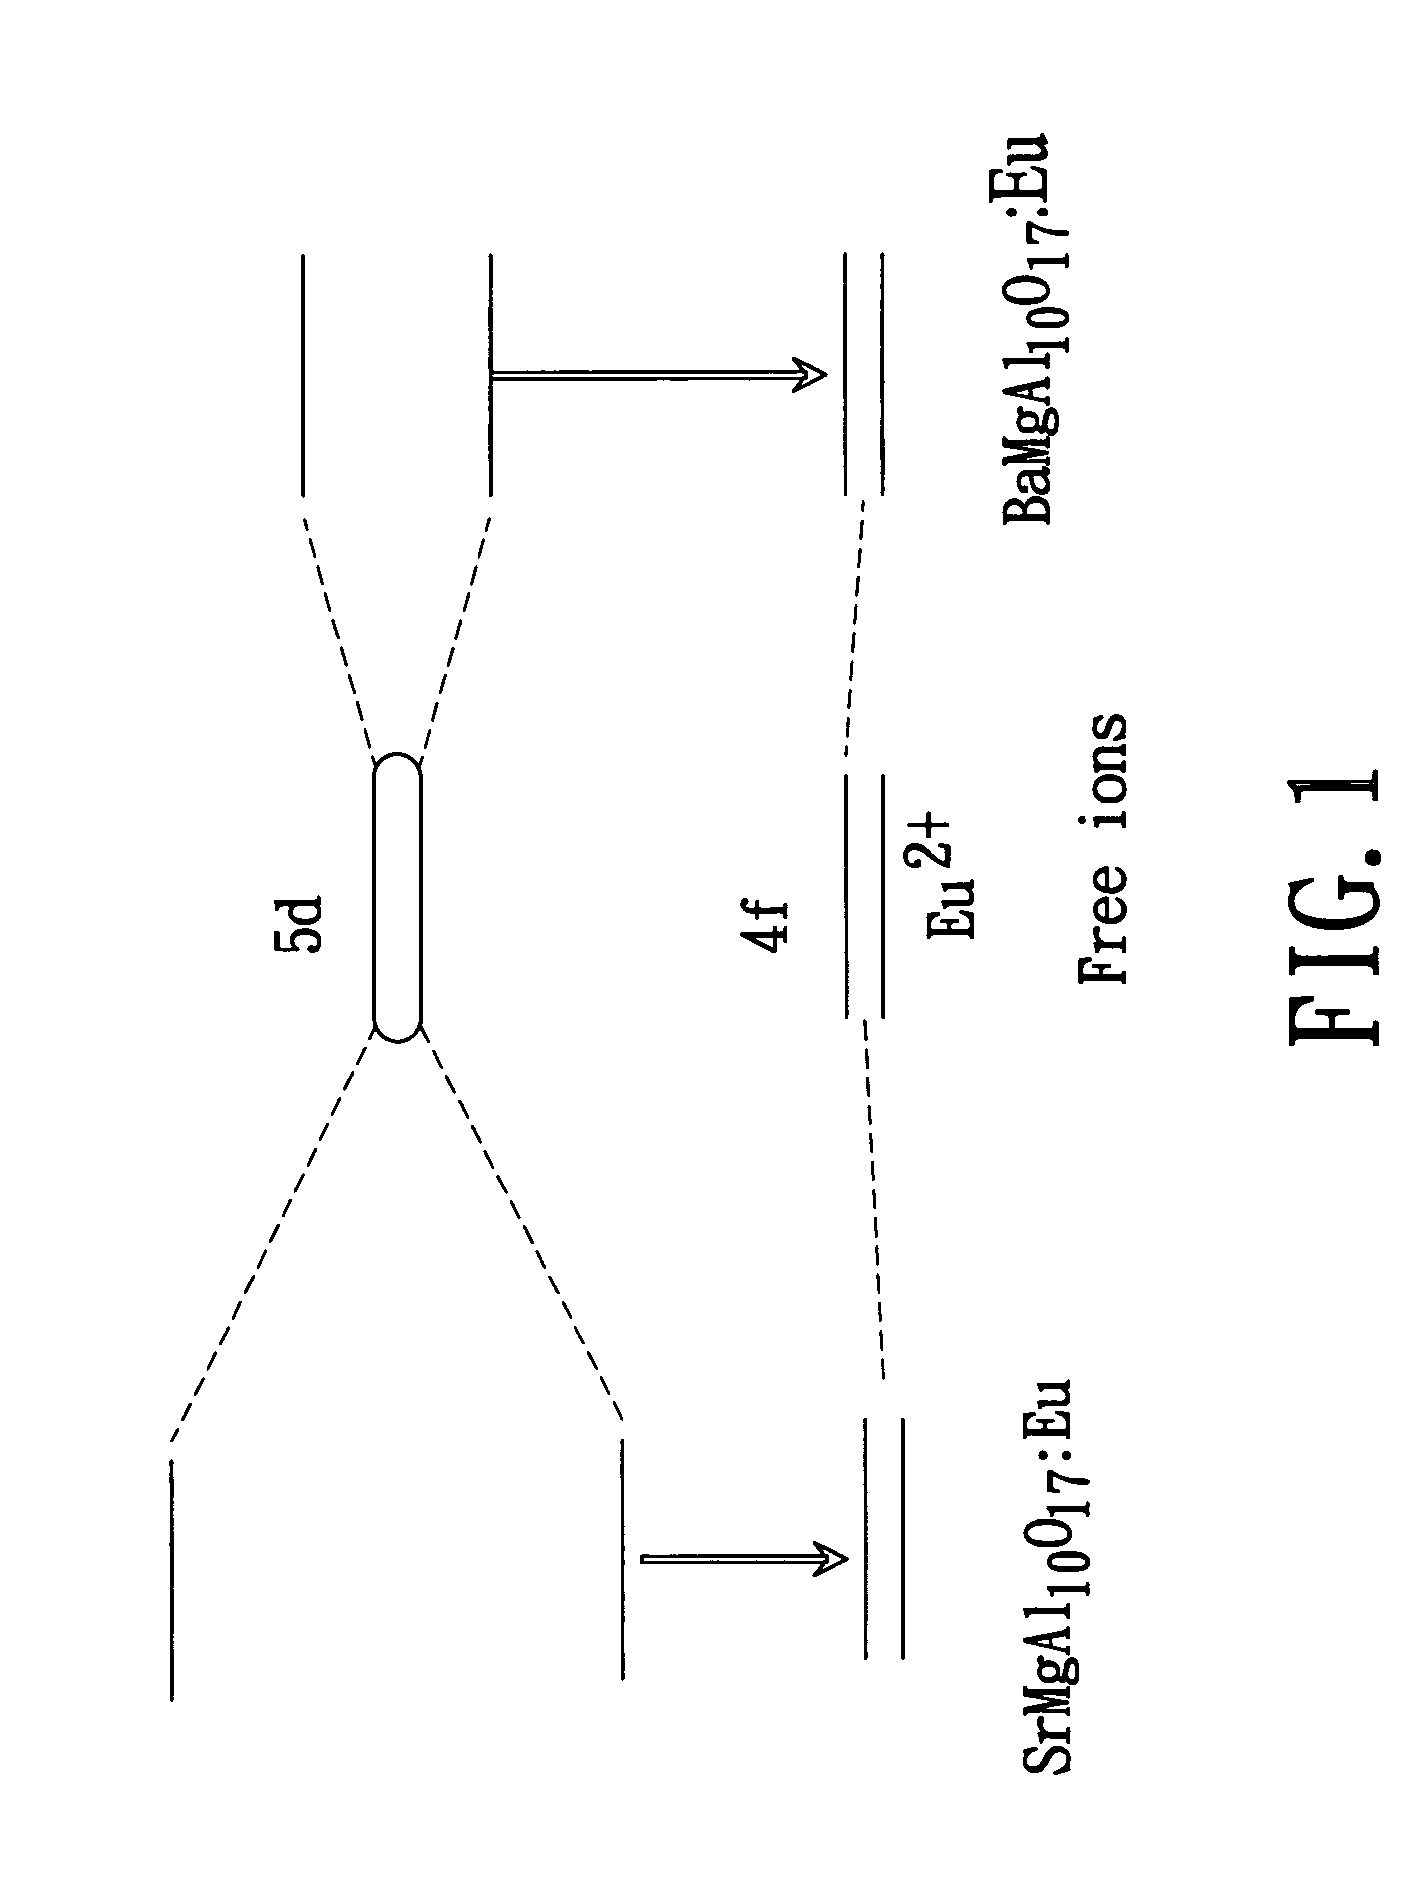 White light illumination device and method of manufacturing the same